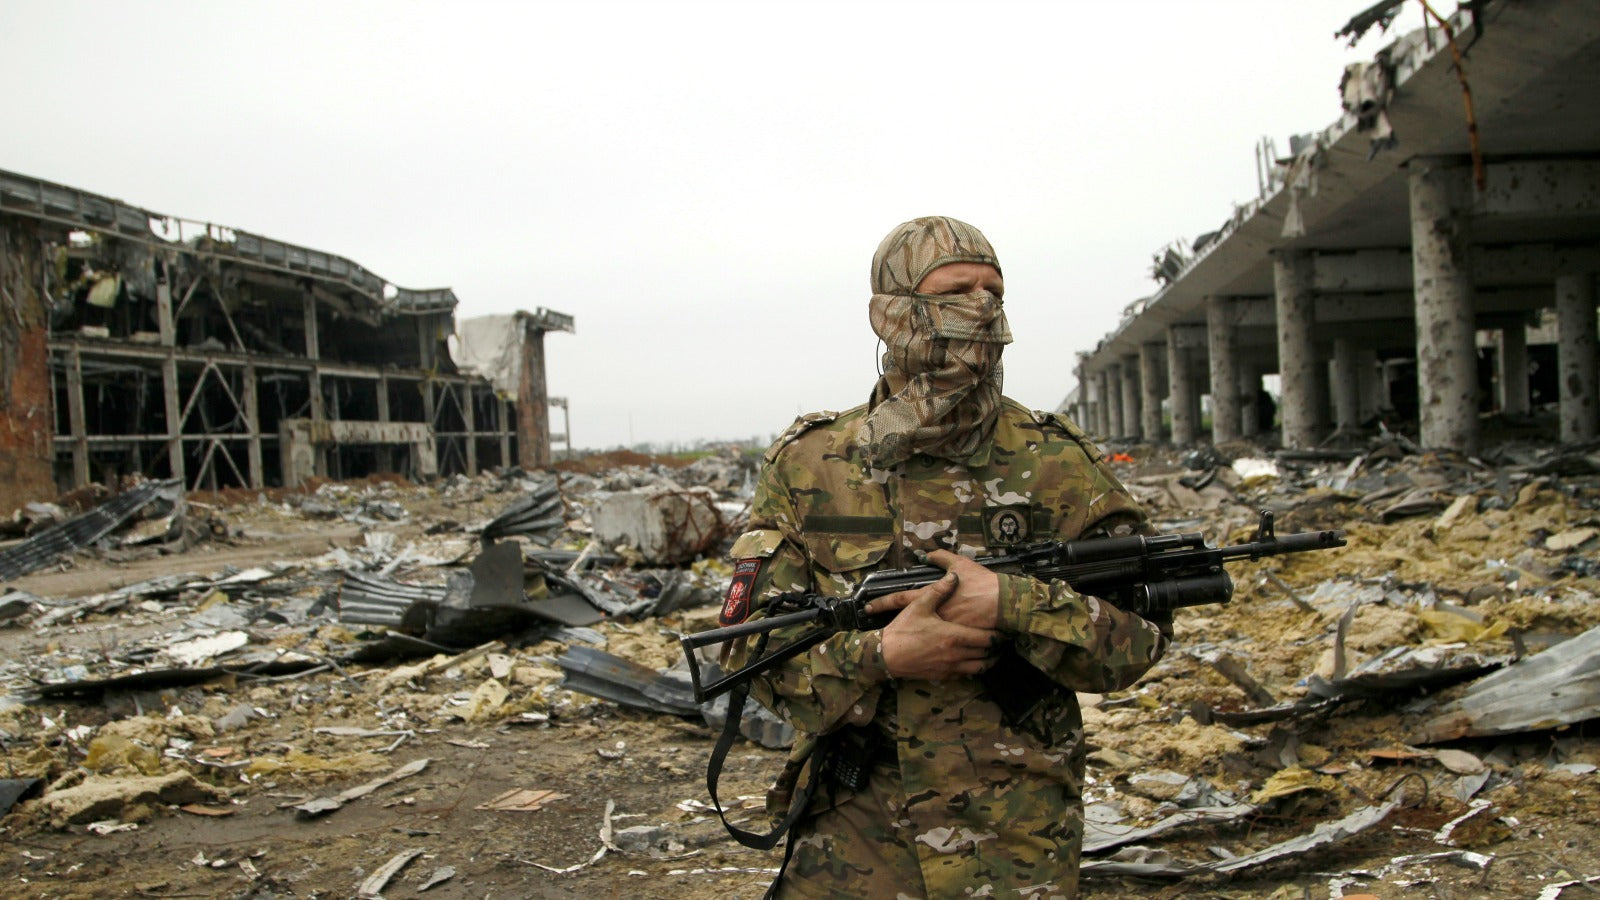  A member of the self-proclaimed Donetsk People's Republic forces stands guard near buildings destroyed during battles with Ukrainian